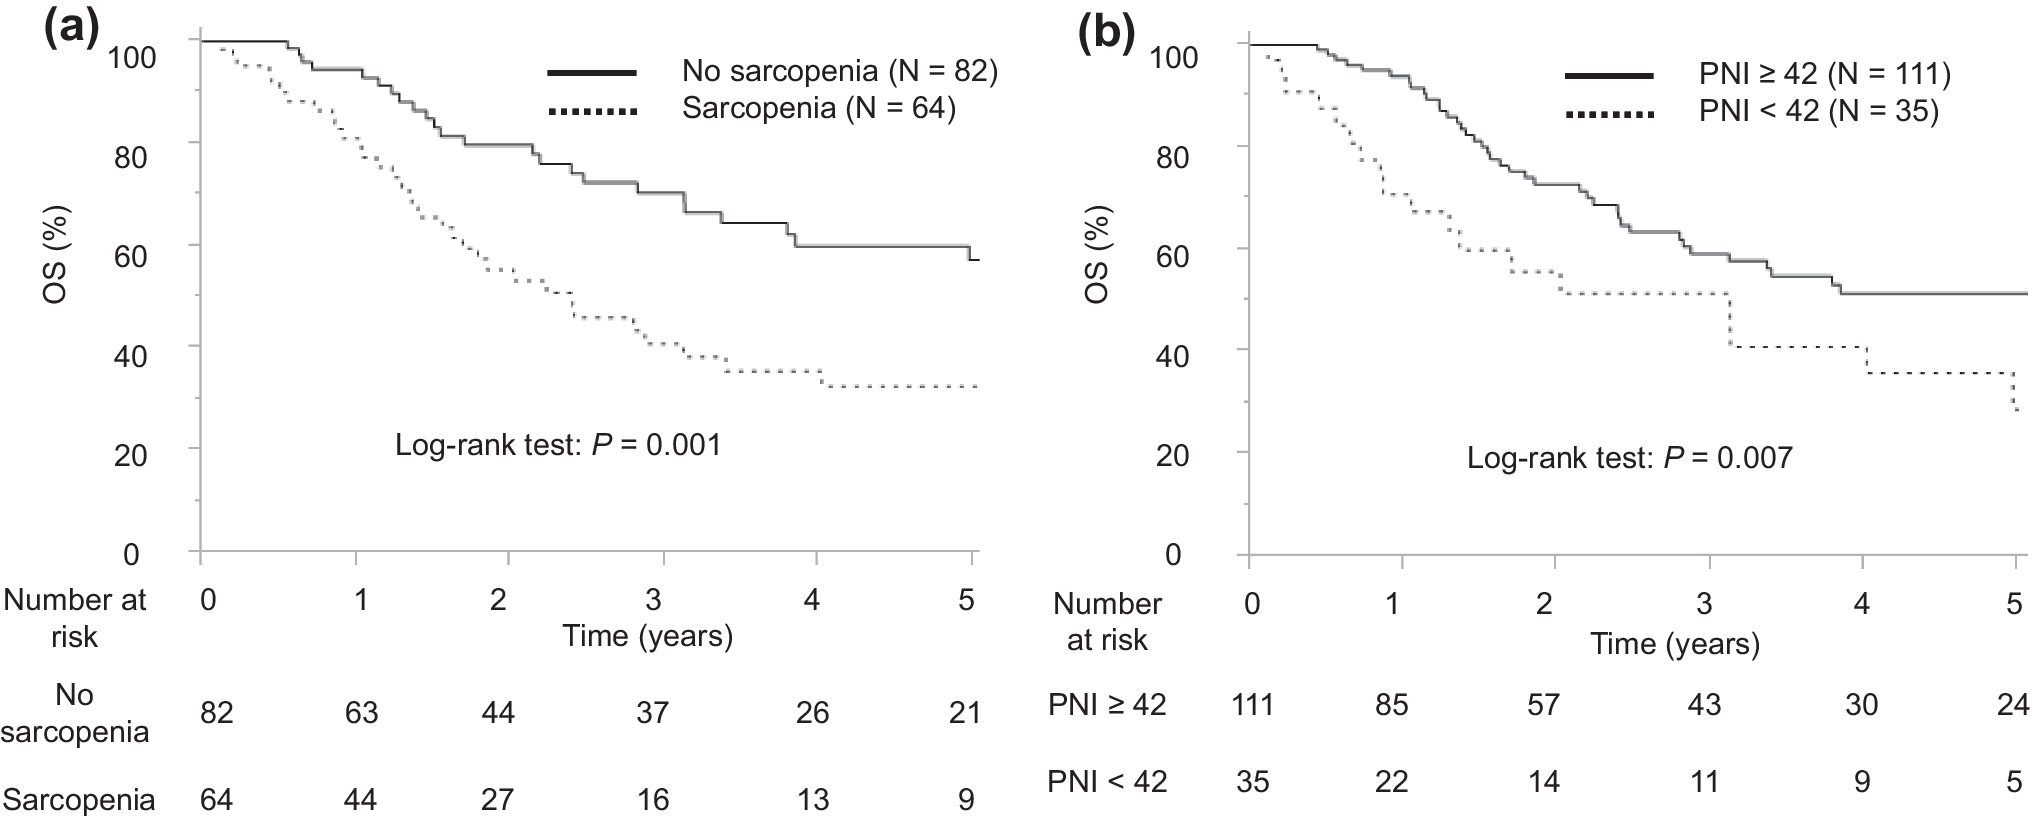 Prognostic Significance of Sarcopenia and Systemic Inflammatory Markers in Biliary Tract Cancer: A Retrospective Cohort Study